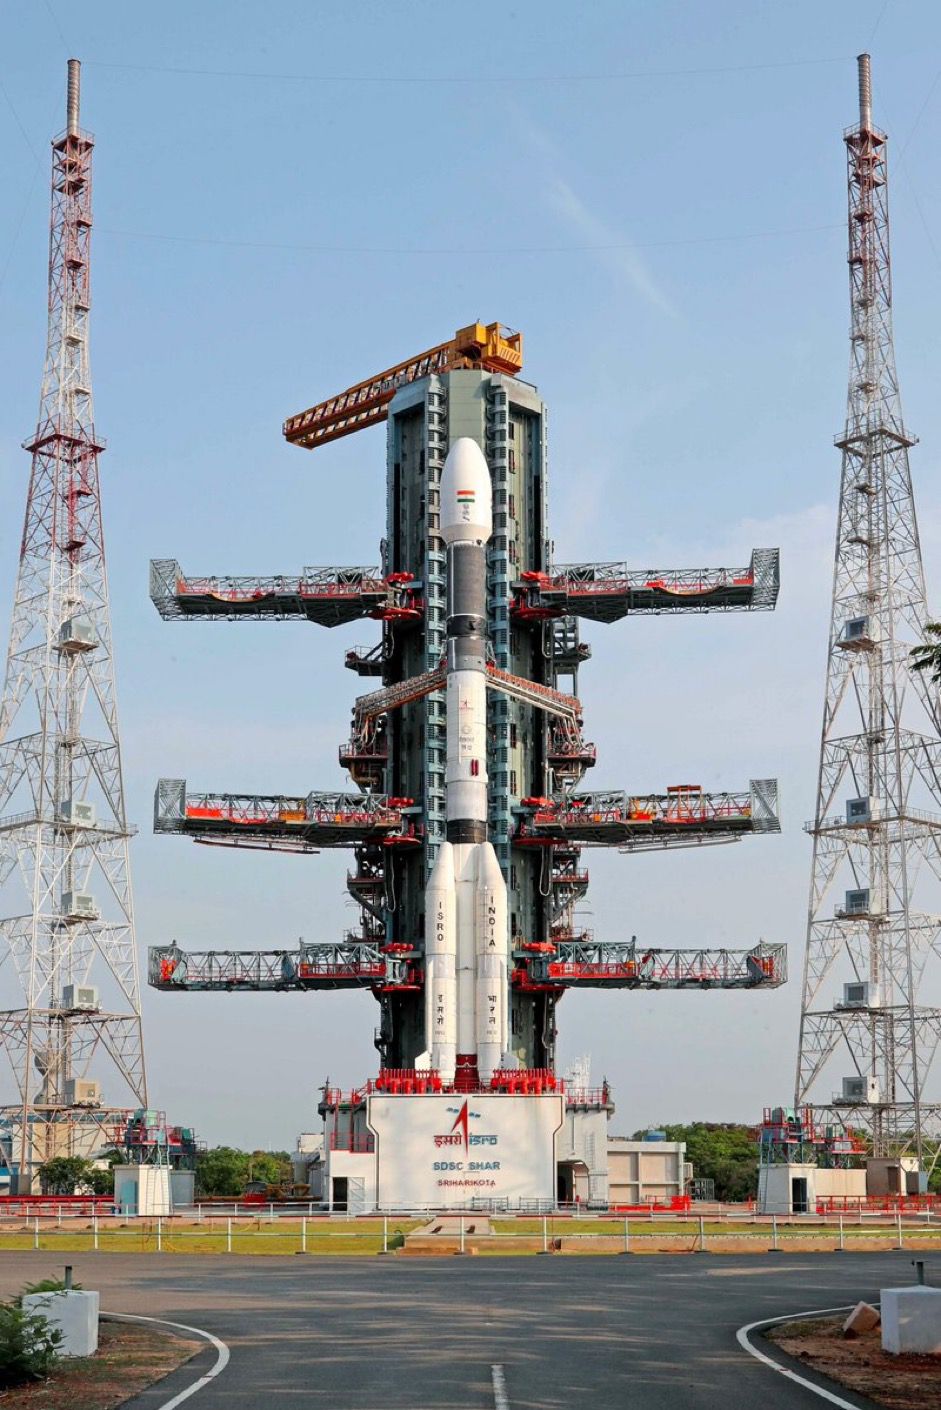 The satellite started its journey from the SDSC-SHAR launch port in Andhra Pradesh on January 25, adding it to a Pre-Shipment Review (PSR) with the active participation of members from the user community.